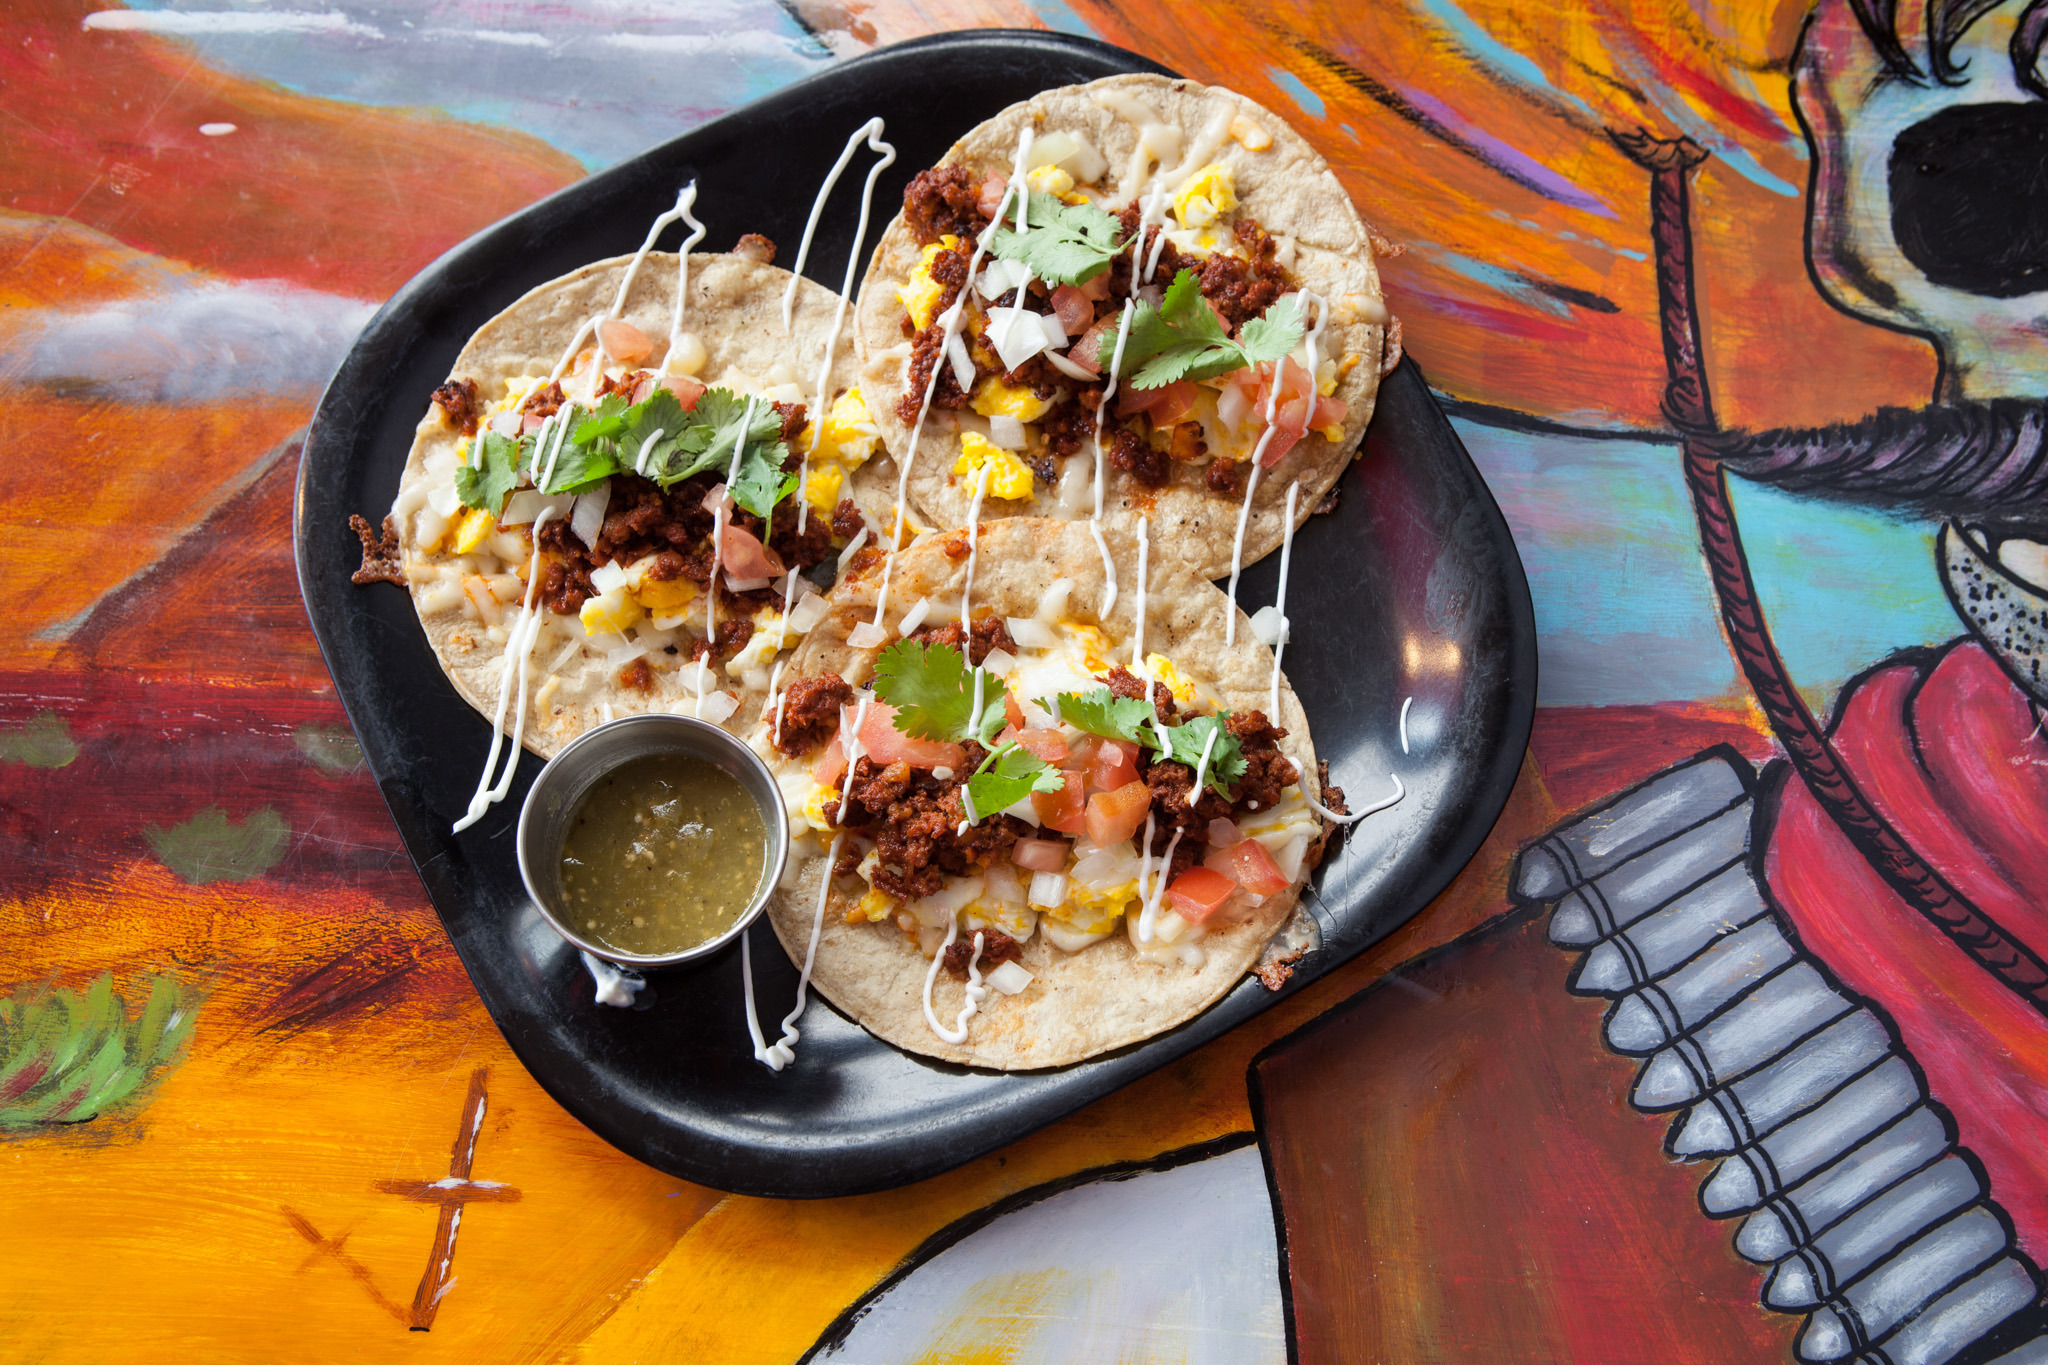 5 places for Mexican breakfast dishes: tacos, burritos and more